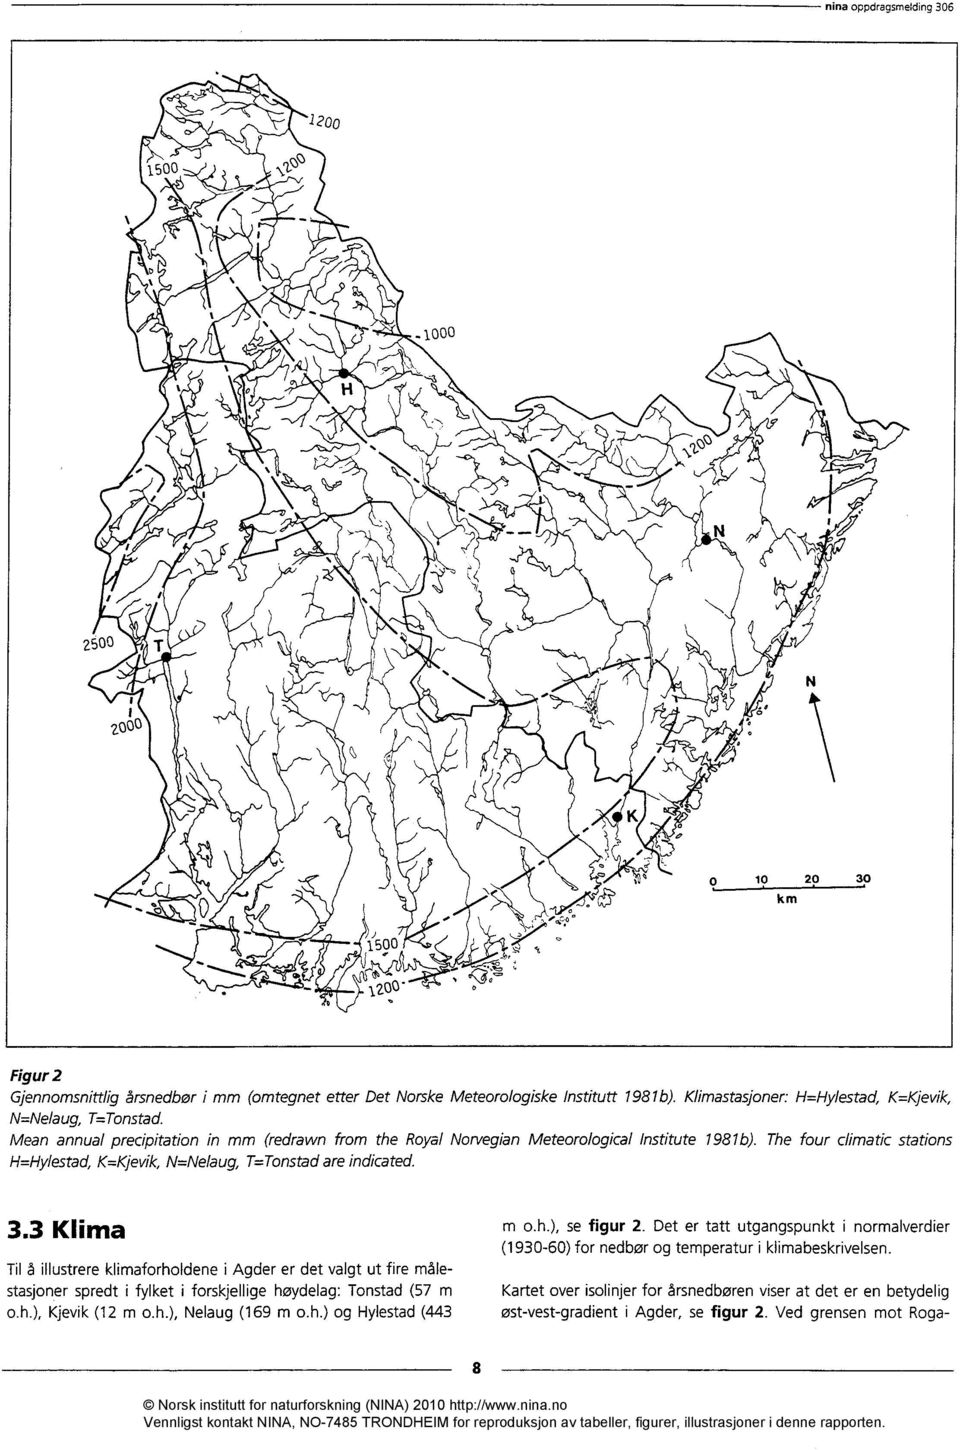 Mean annual precipitation in mm (redrawn from the Royal Norvegian Meteorological Institute 1981b). The four dimatic stations H=Hylestad, K=Kjevik, N=Nelaug, T=Tonstad are indicated. 3.